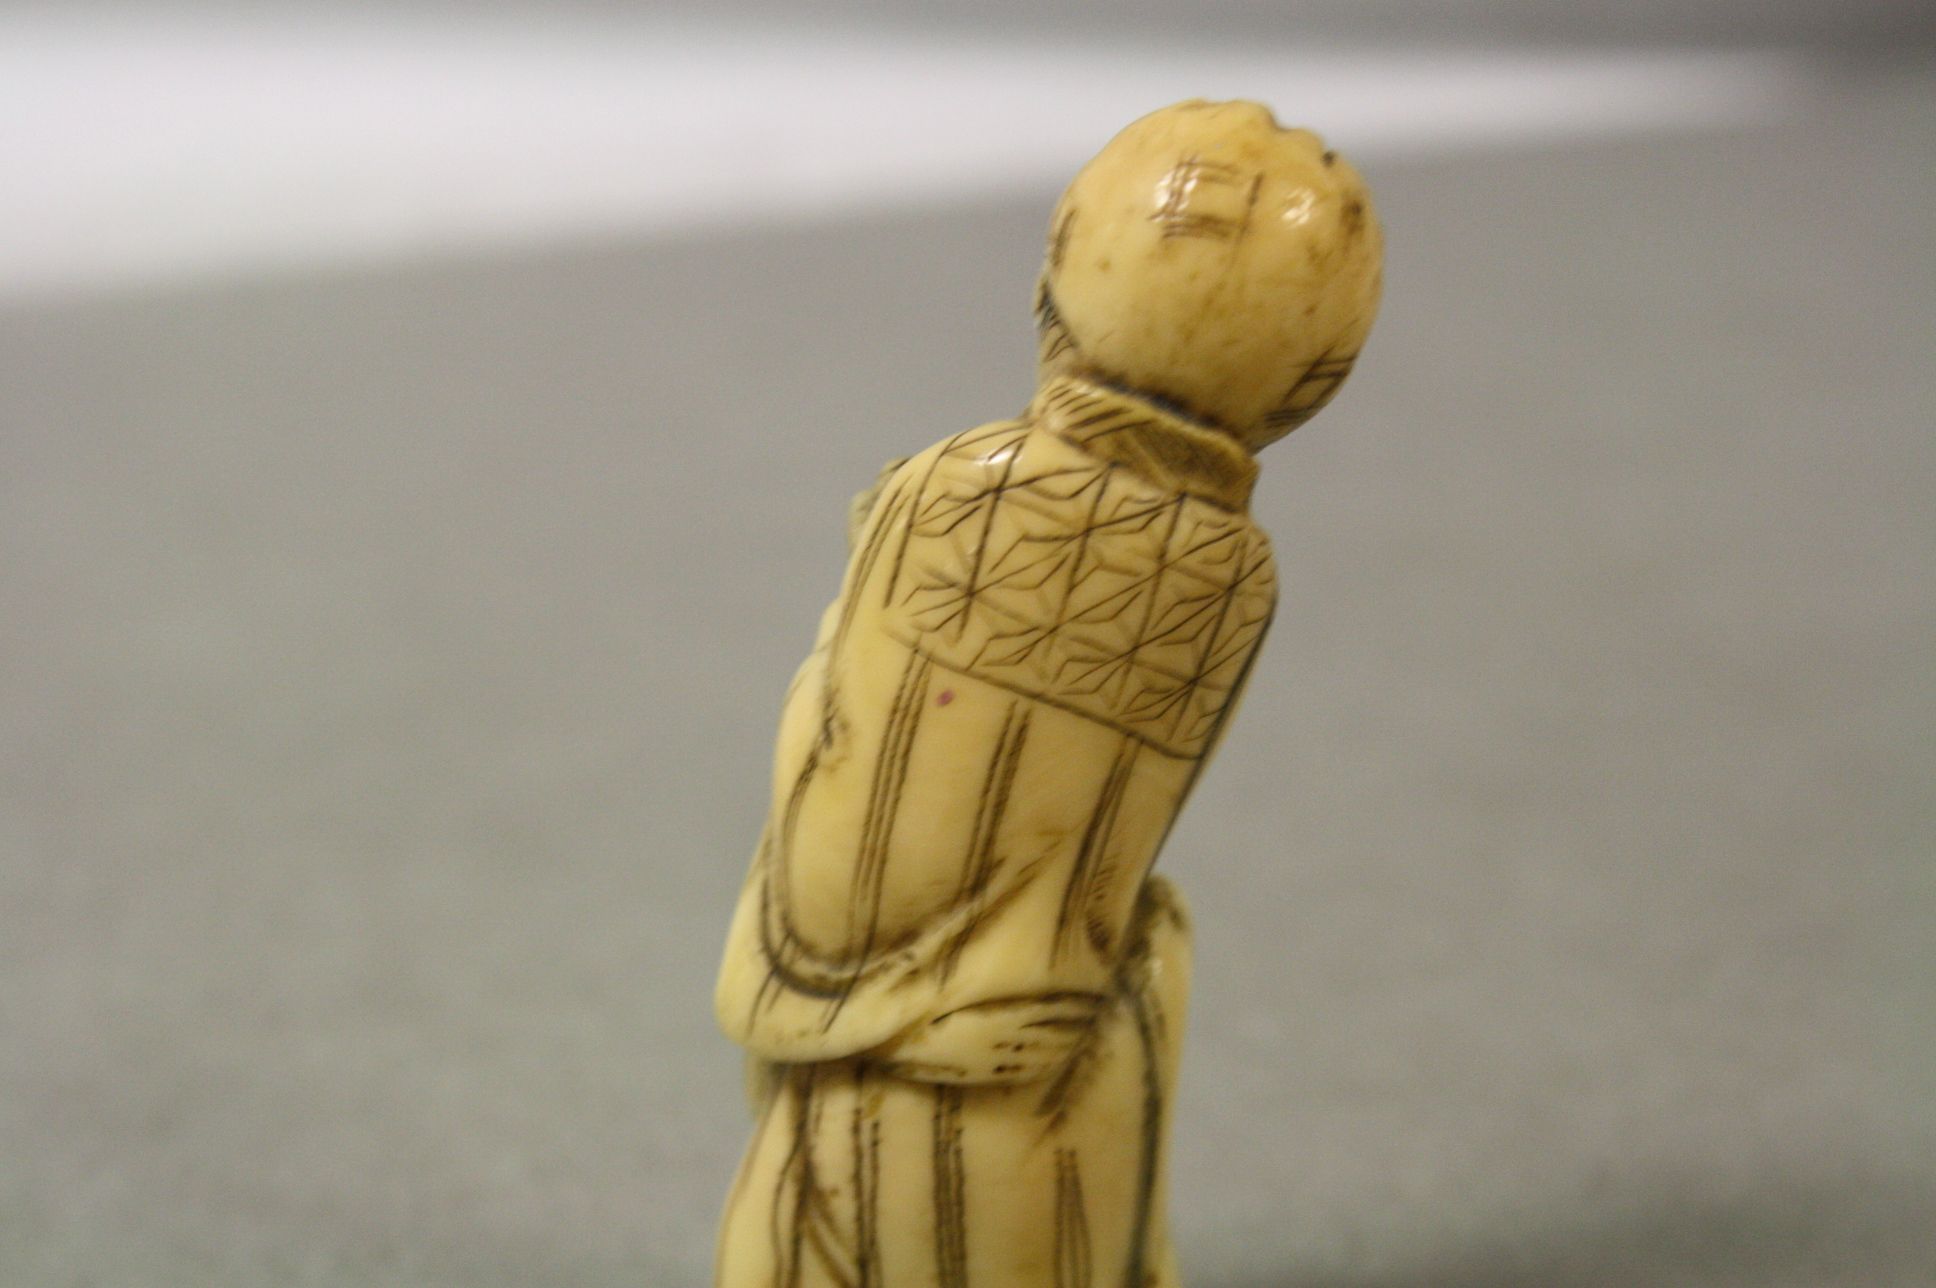 Antique ivory netsuke in the form of a man with net - Image 3 of 3